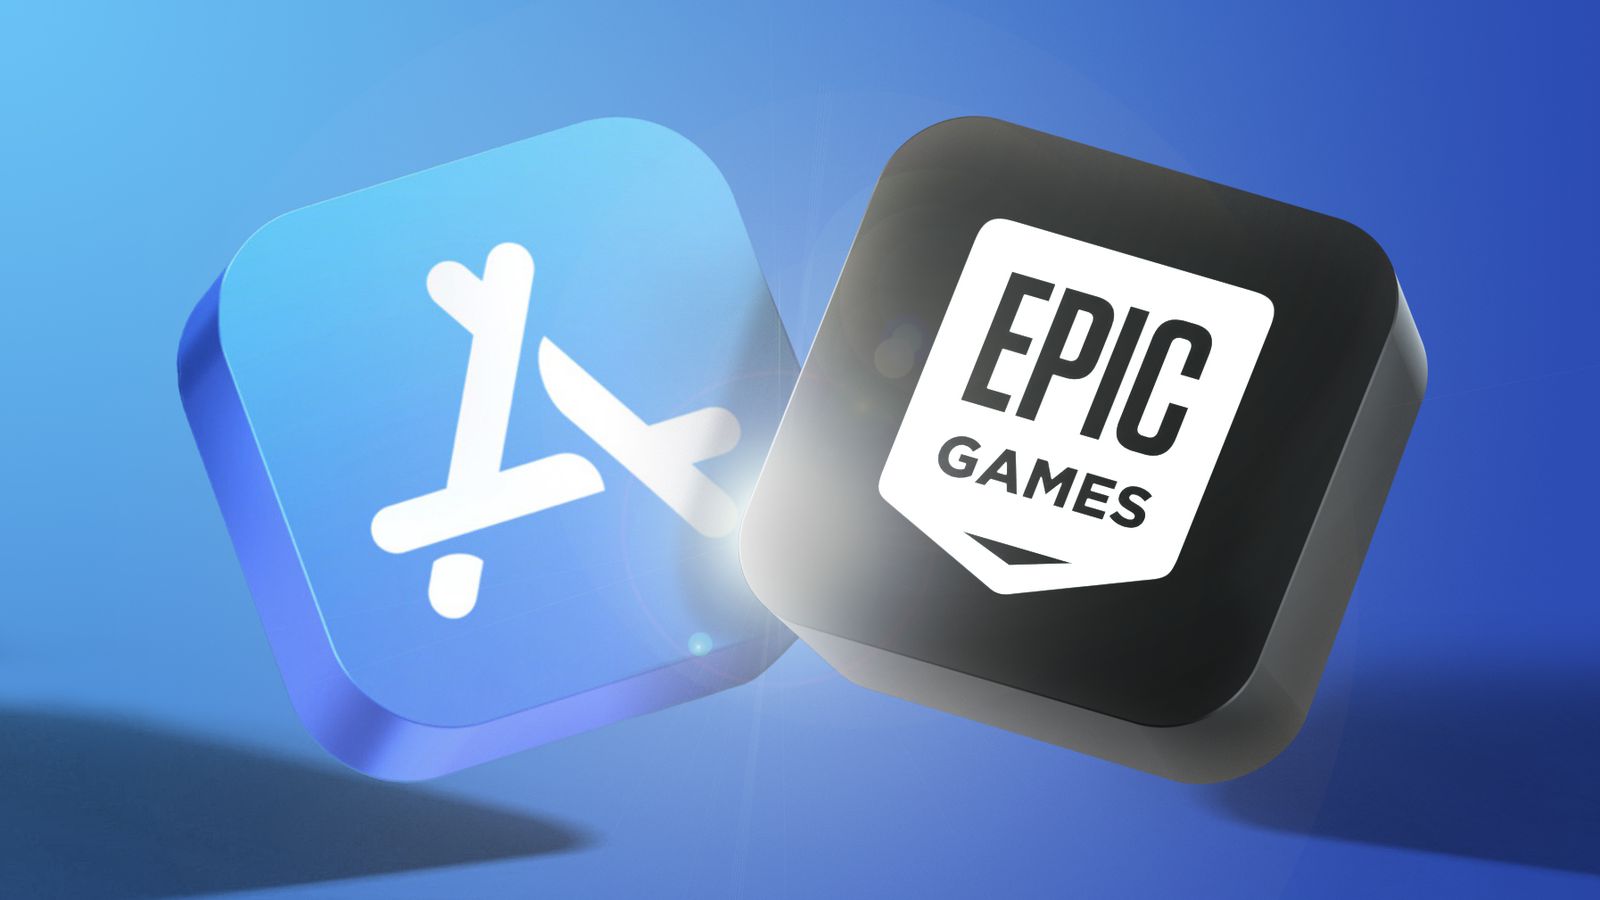 Apple vs Epic Games: Apple is appealing the decision that is labeled a "resounding victory"